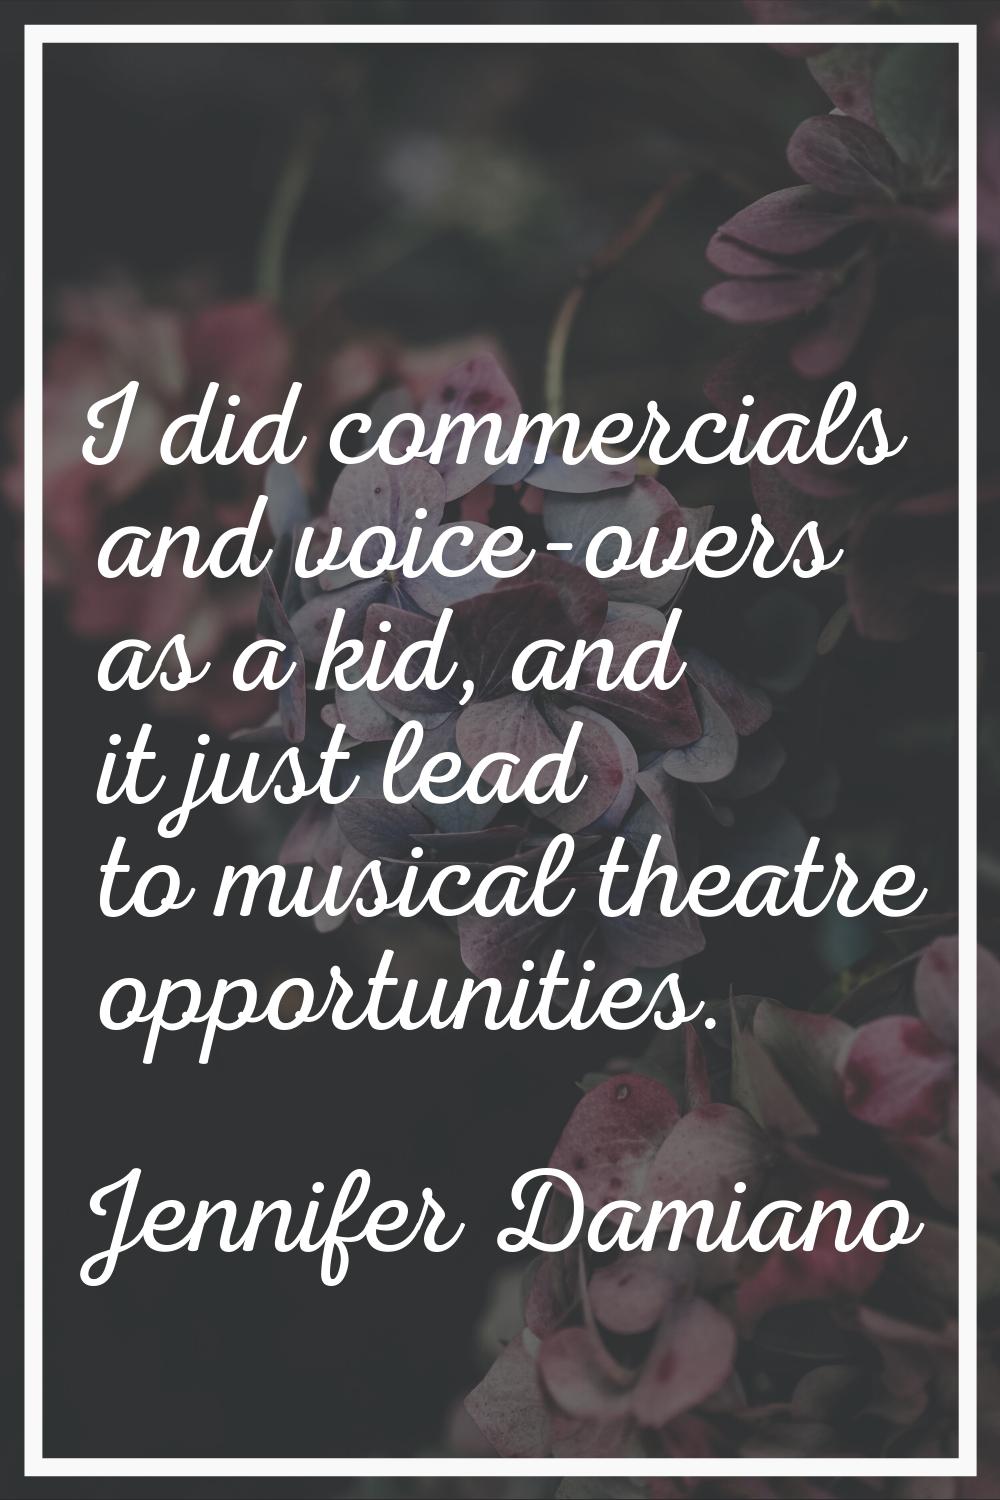 I did commercials and voice-overs as a kid, and it just lead to musical theatre opportunities.